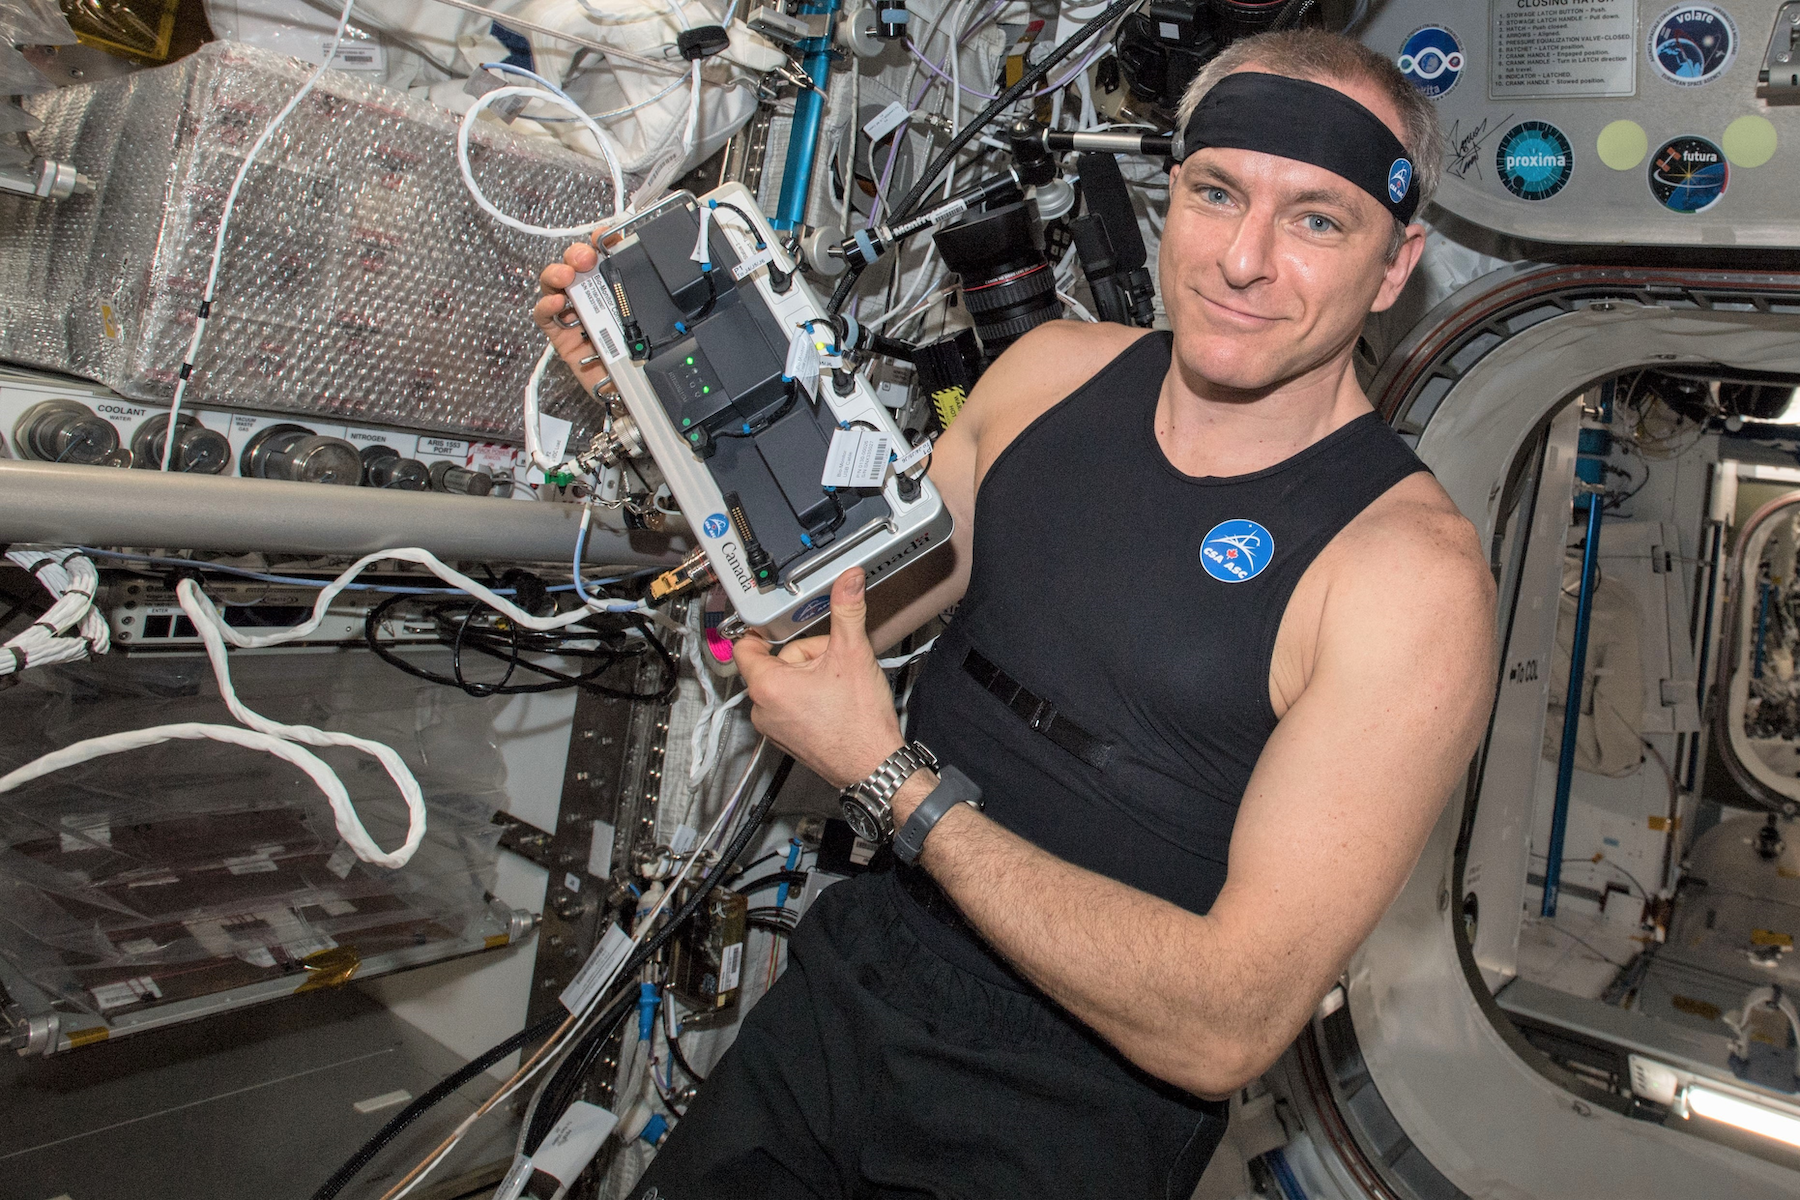 A man wearing a headband in a spaceship holds a complicated-looking rectangular machine.